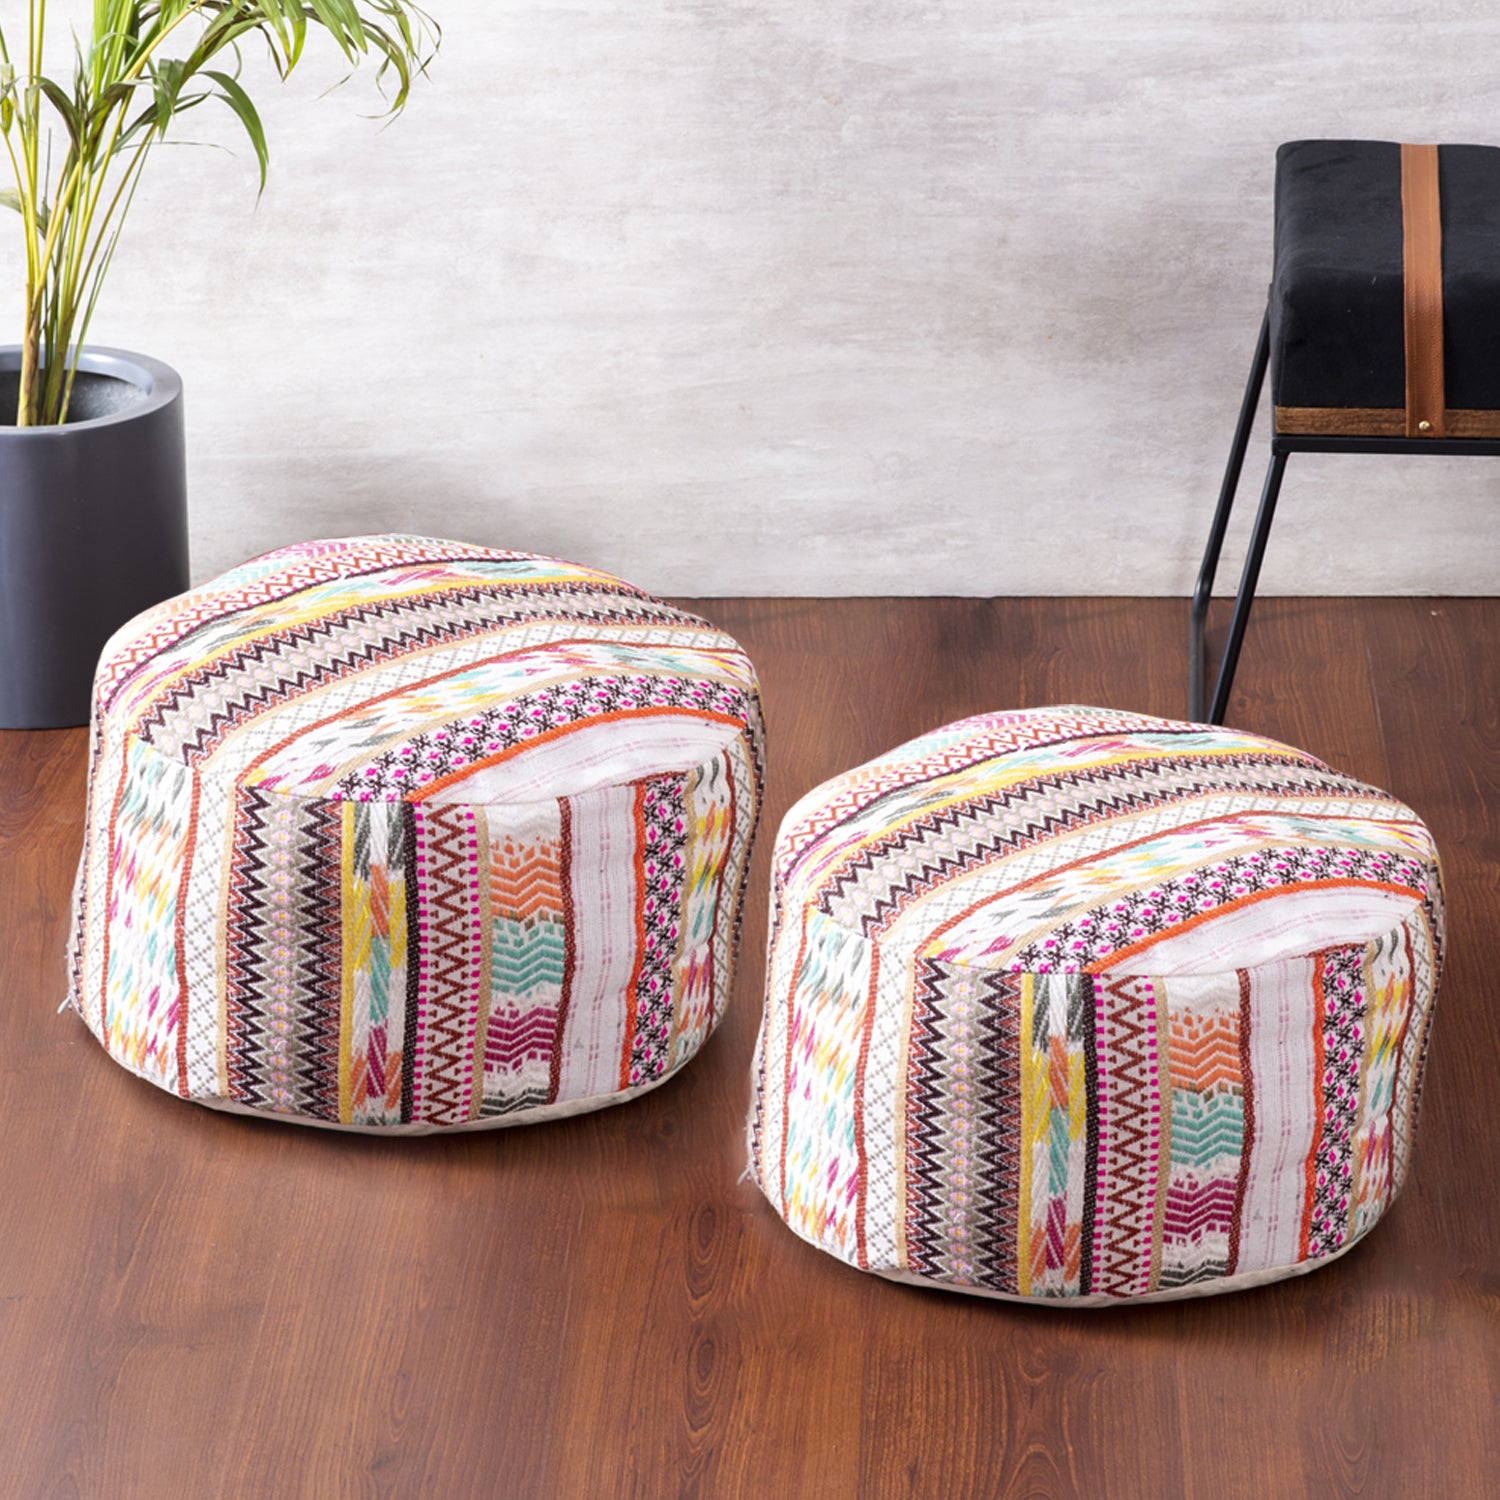 pouf for kids room